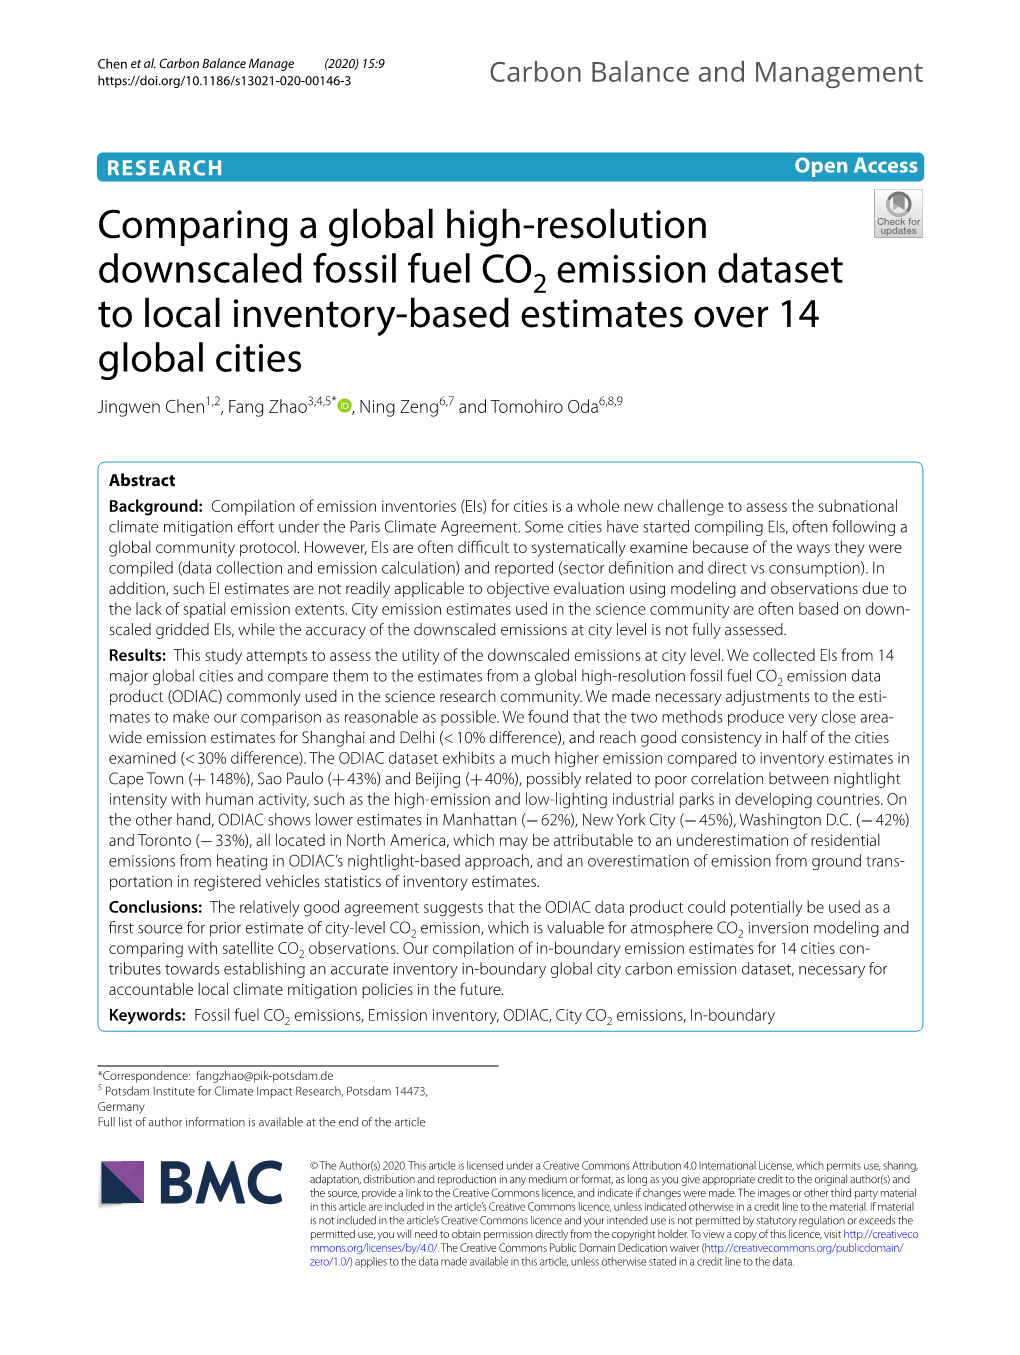 Comparing a Global High-Resolution Downscaled Fossil Fuel CO2 Emission Dataset to Local Inventory-Based Estimates Over 14 Global